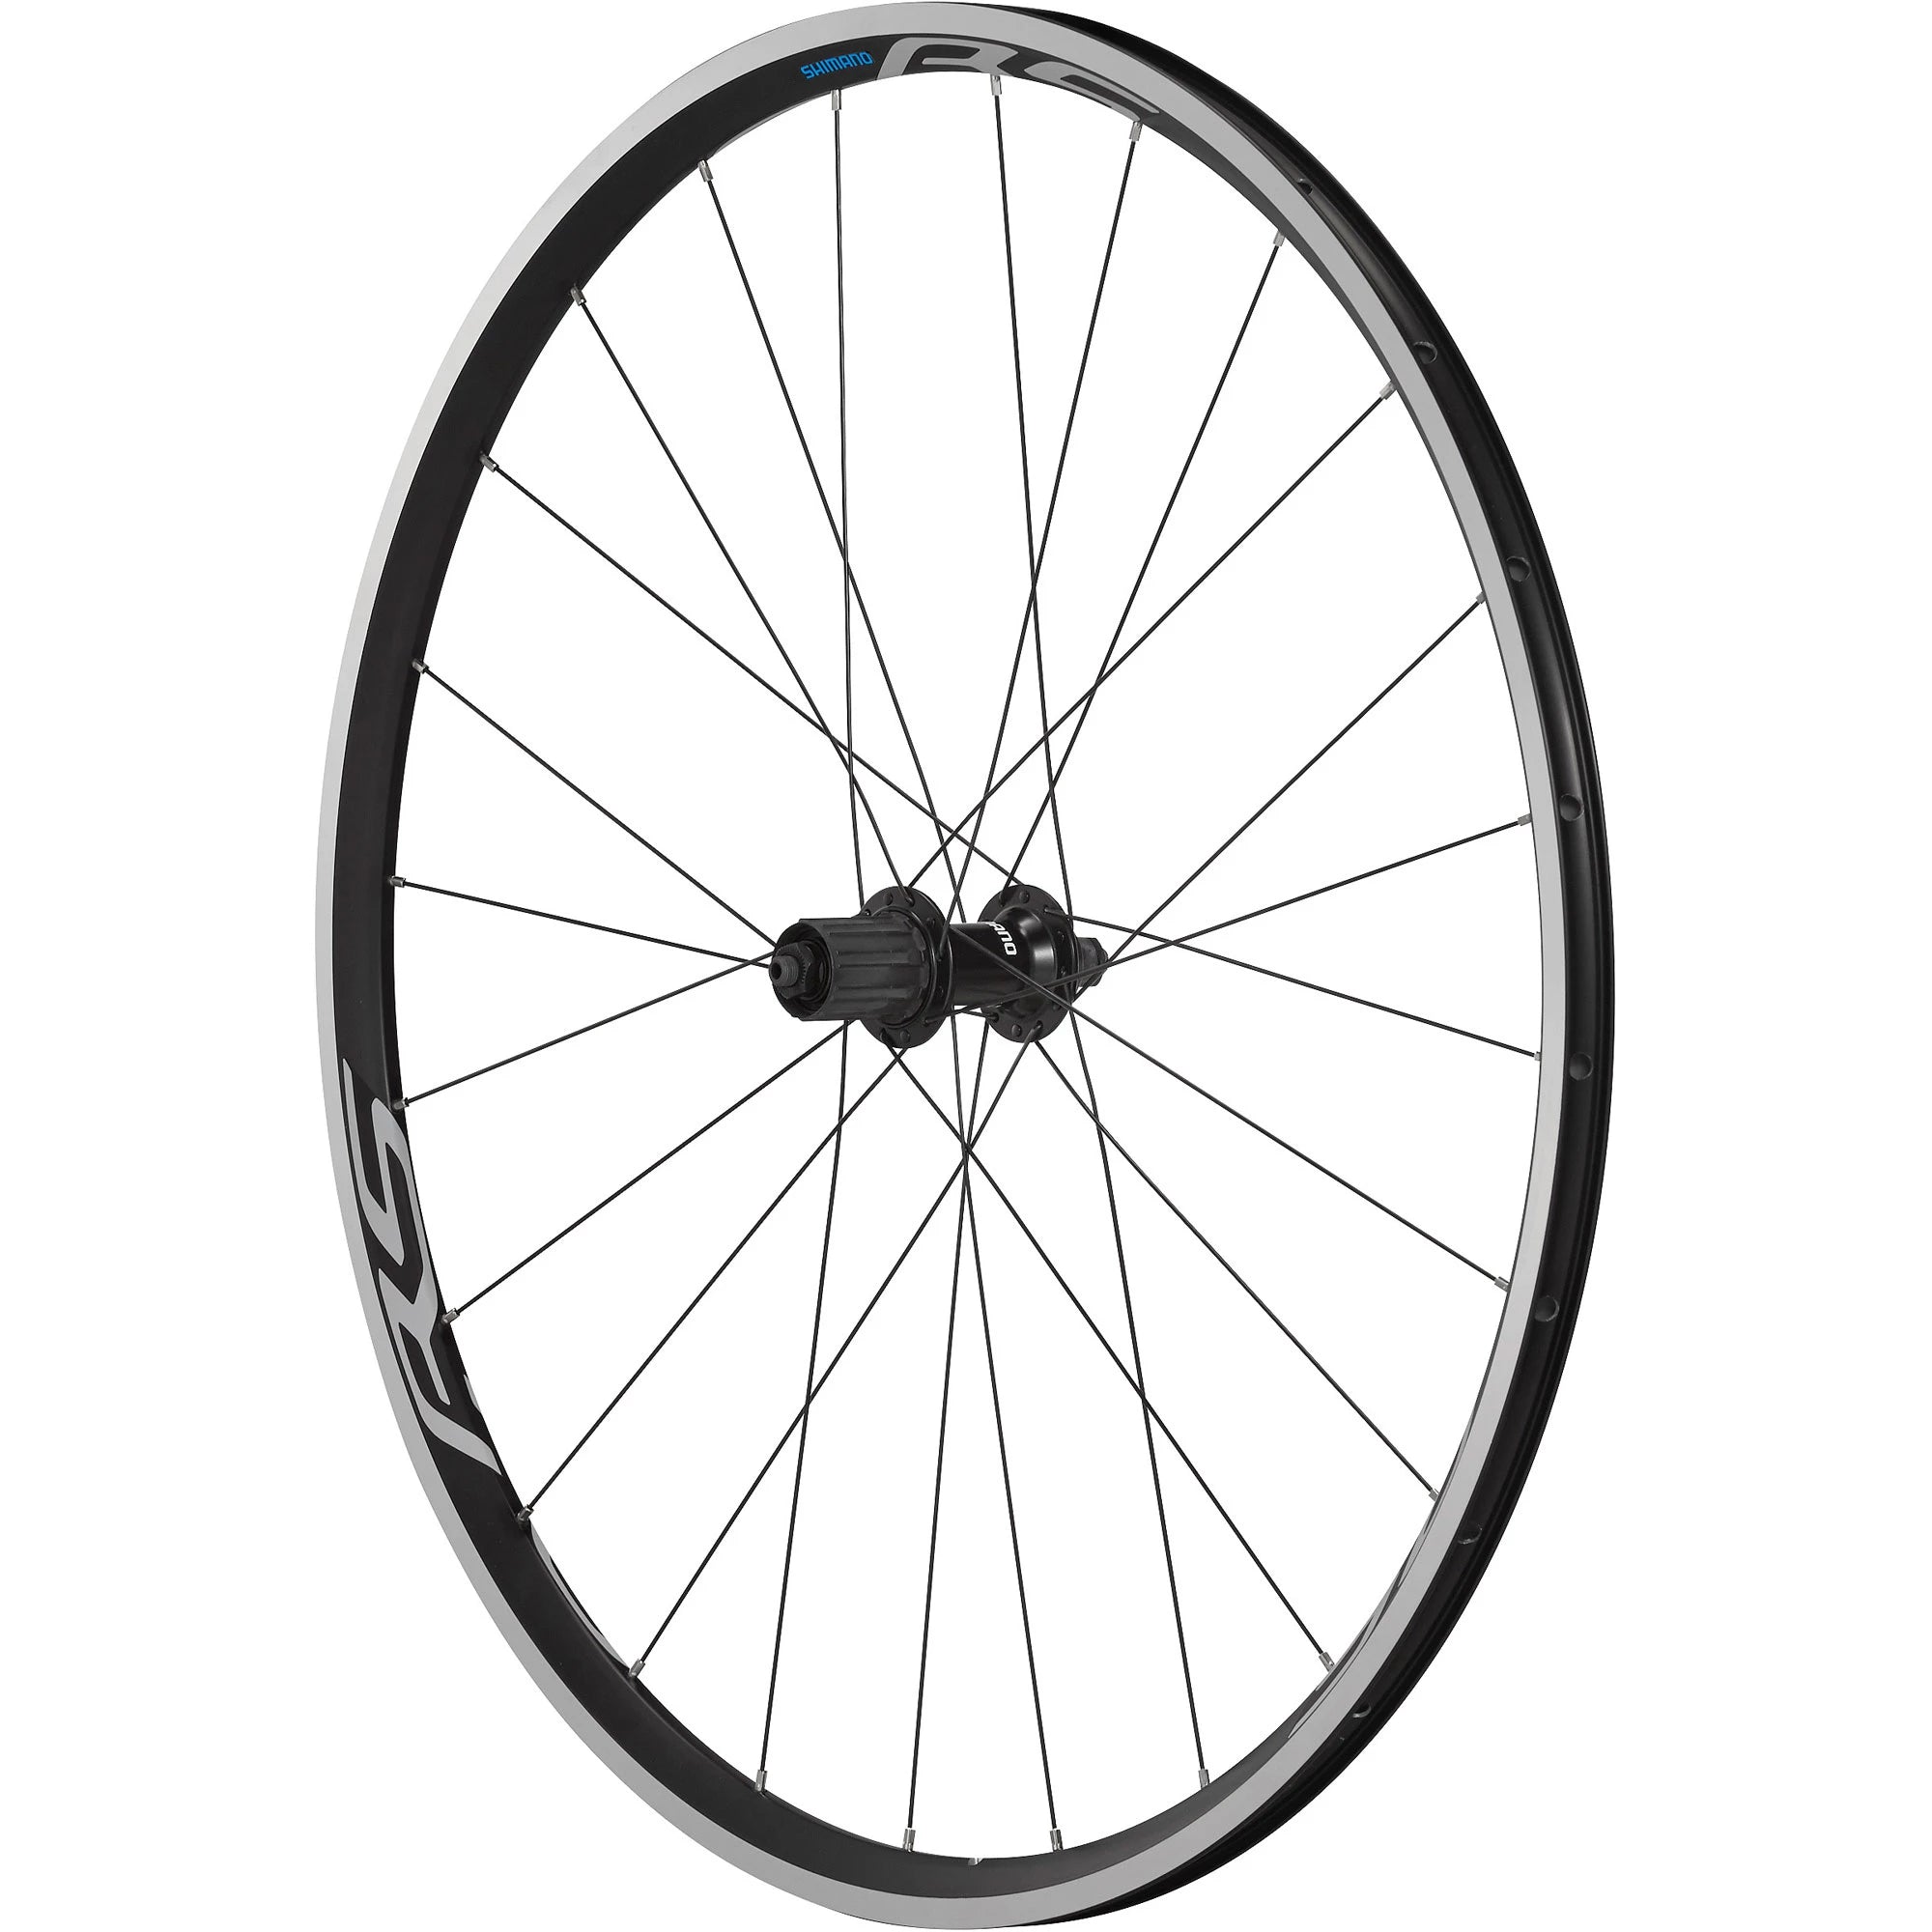 Shimano-WH-RS100-9-10-11-Speed-Rear-Clincher-Wheel.webp